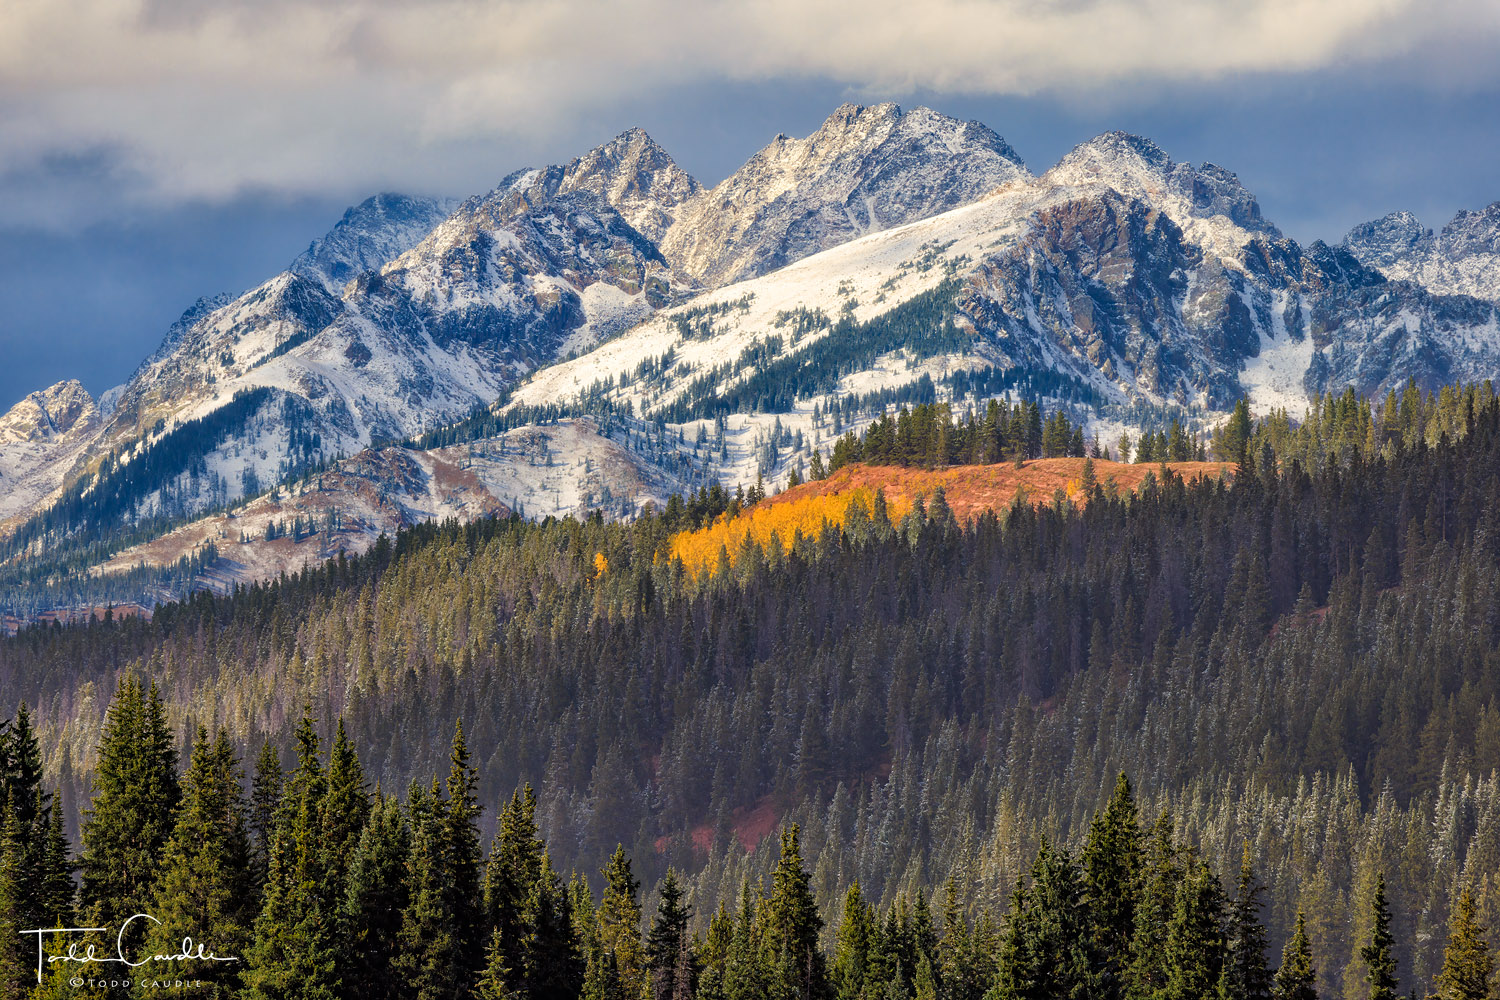 An early-season storm begins to clear, and reveals craggy peaks of the Gore Range dusted with the season's first snow.